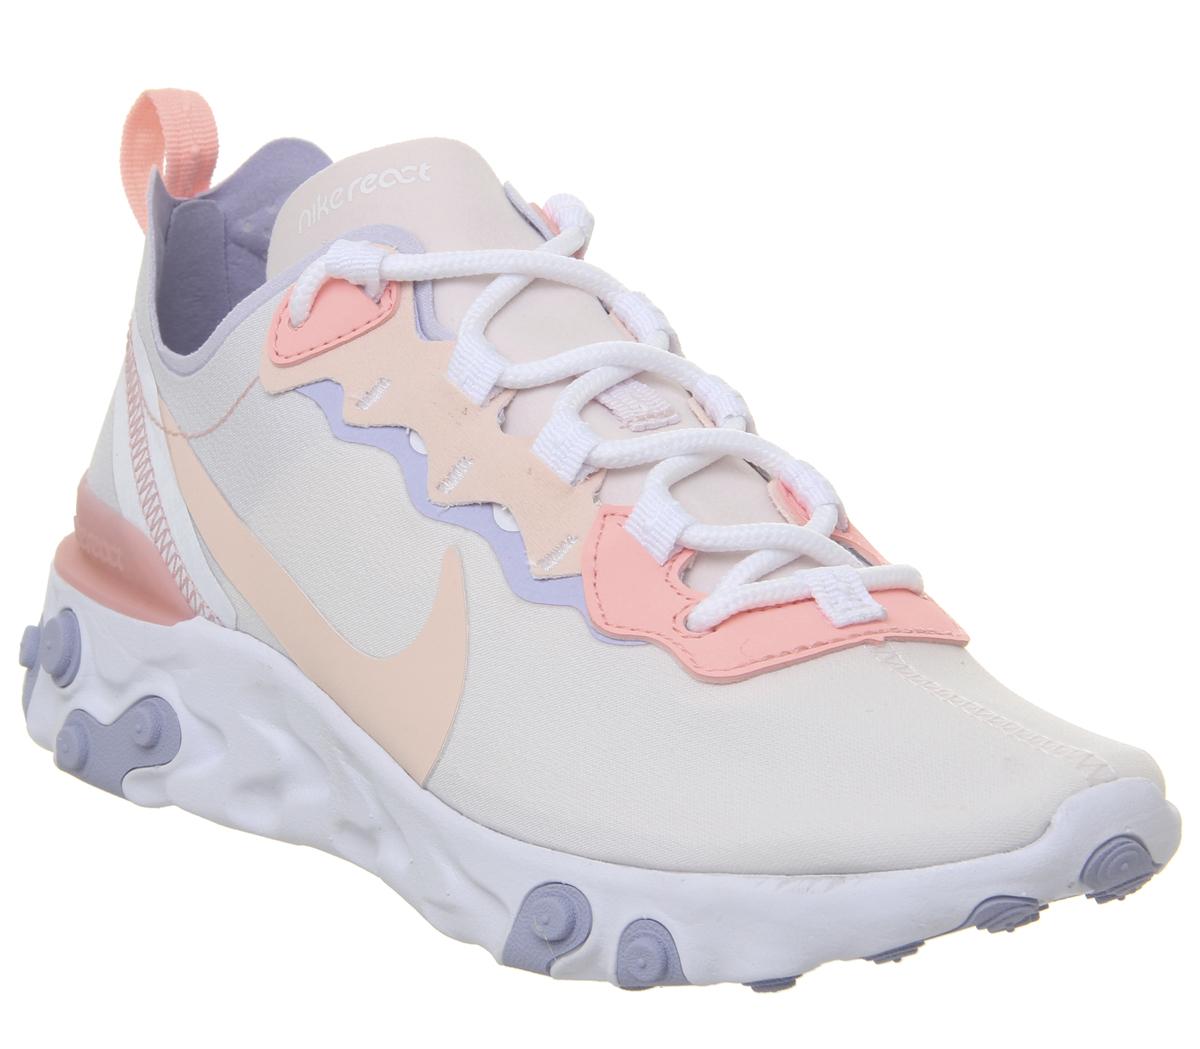 NikeReact Element 55 TrainersPale Pink Washed Coral Oxygen Purple